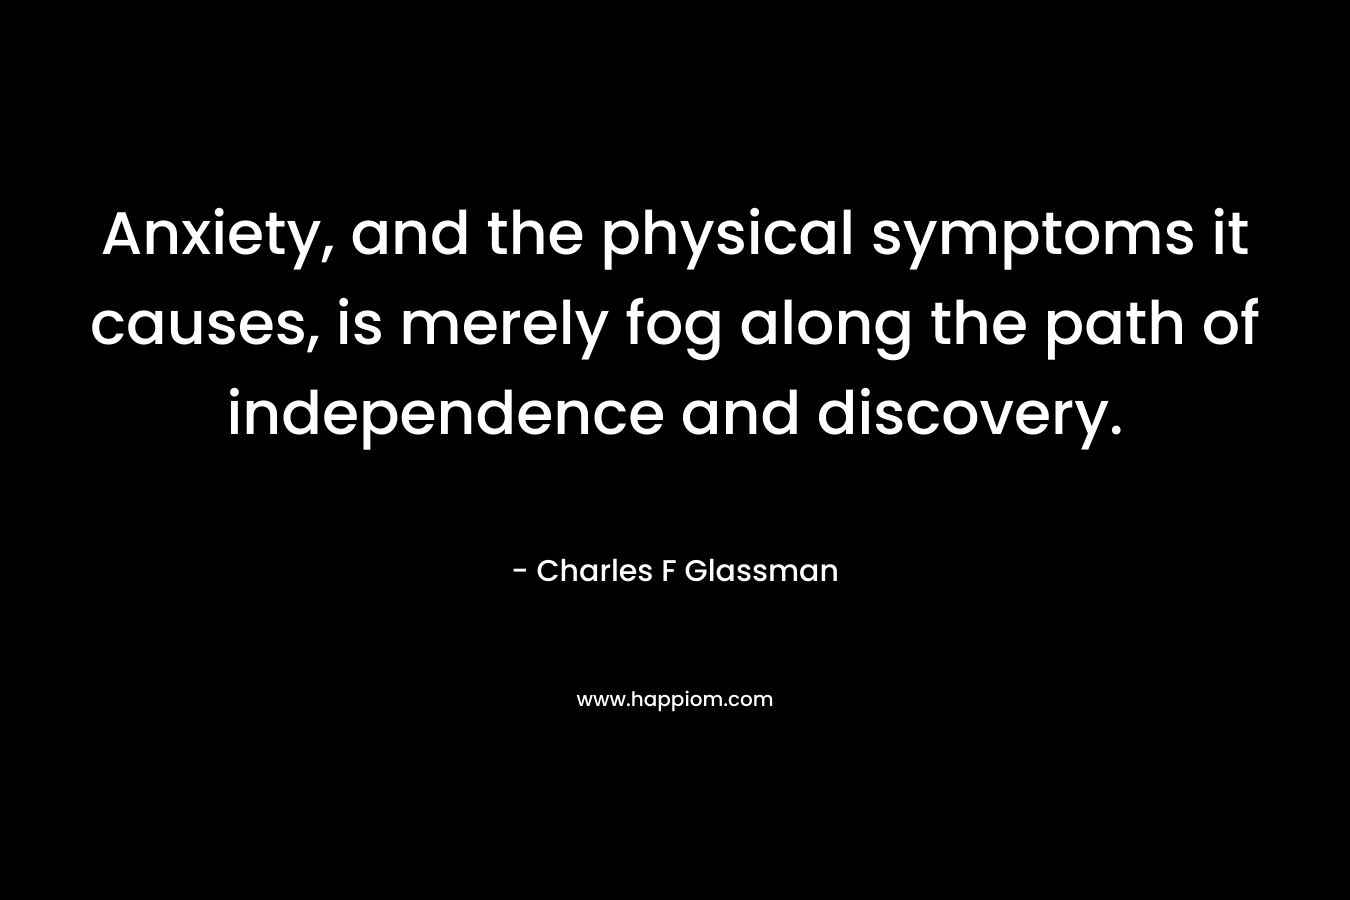 Anxiety, and the physical symptoms it causes, is merely fog along the path of independence and discovery.